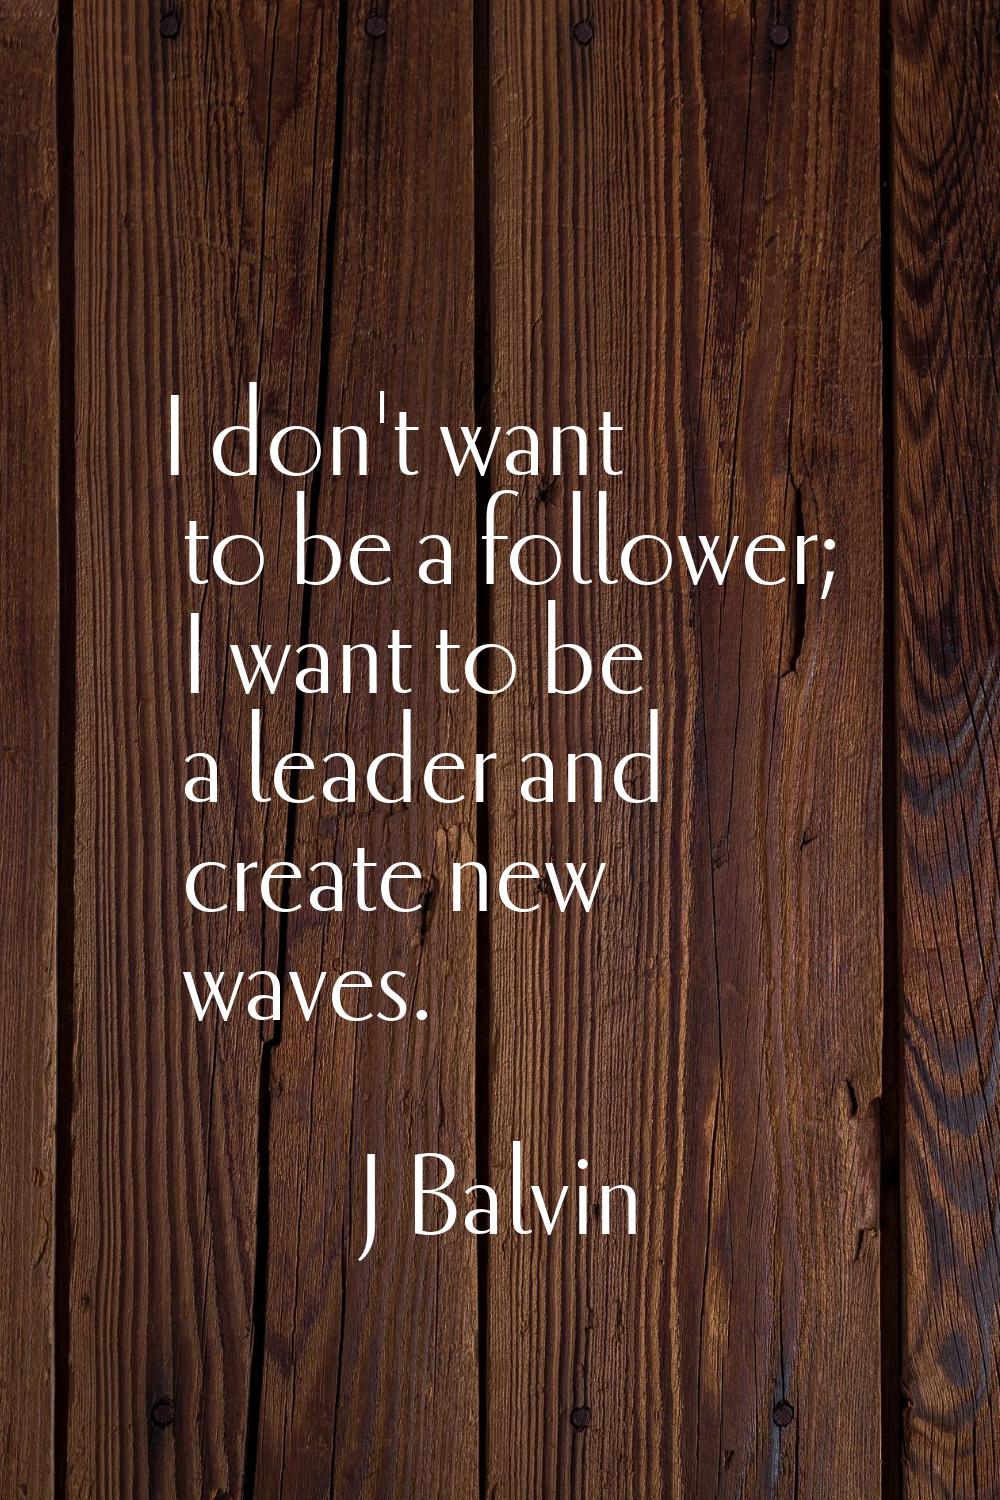 I don't want to be a follower; I want to be a leader and create new waves.